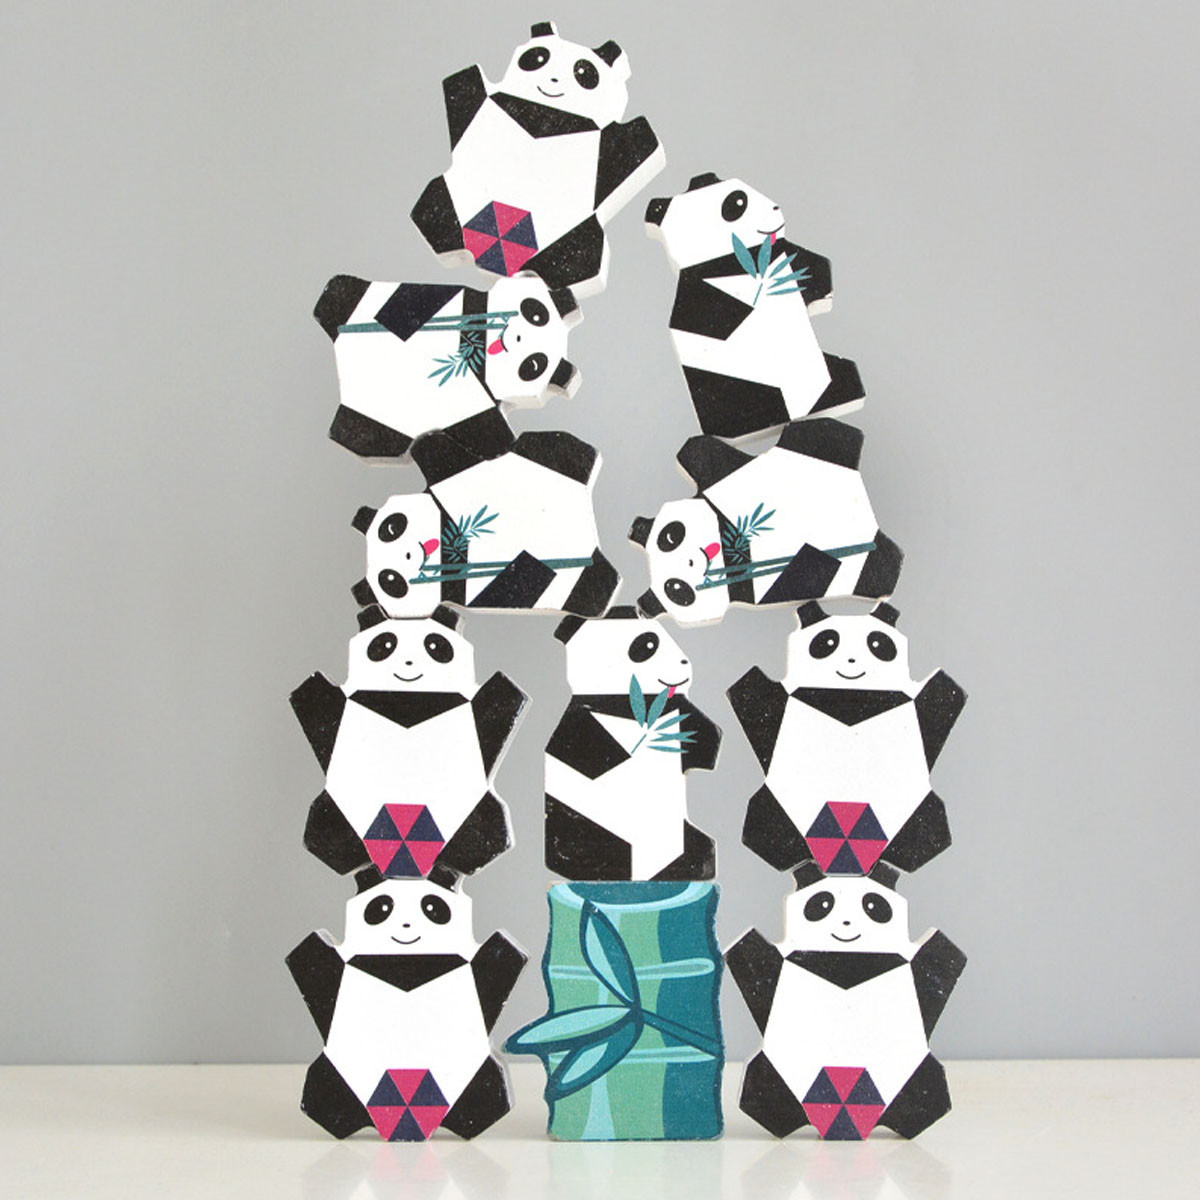 1113-Pcs-Creative-Panda-Dinosaur-Wooden-Stacking-Game-Building-Blocks-Early-Educational-Toy-for-Kids-1717485-6